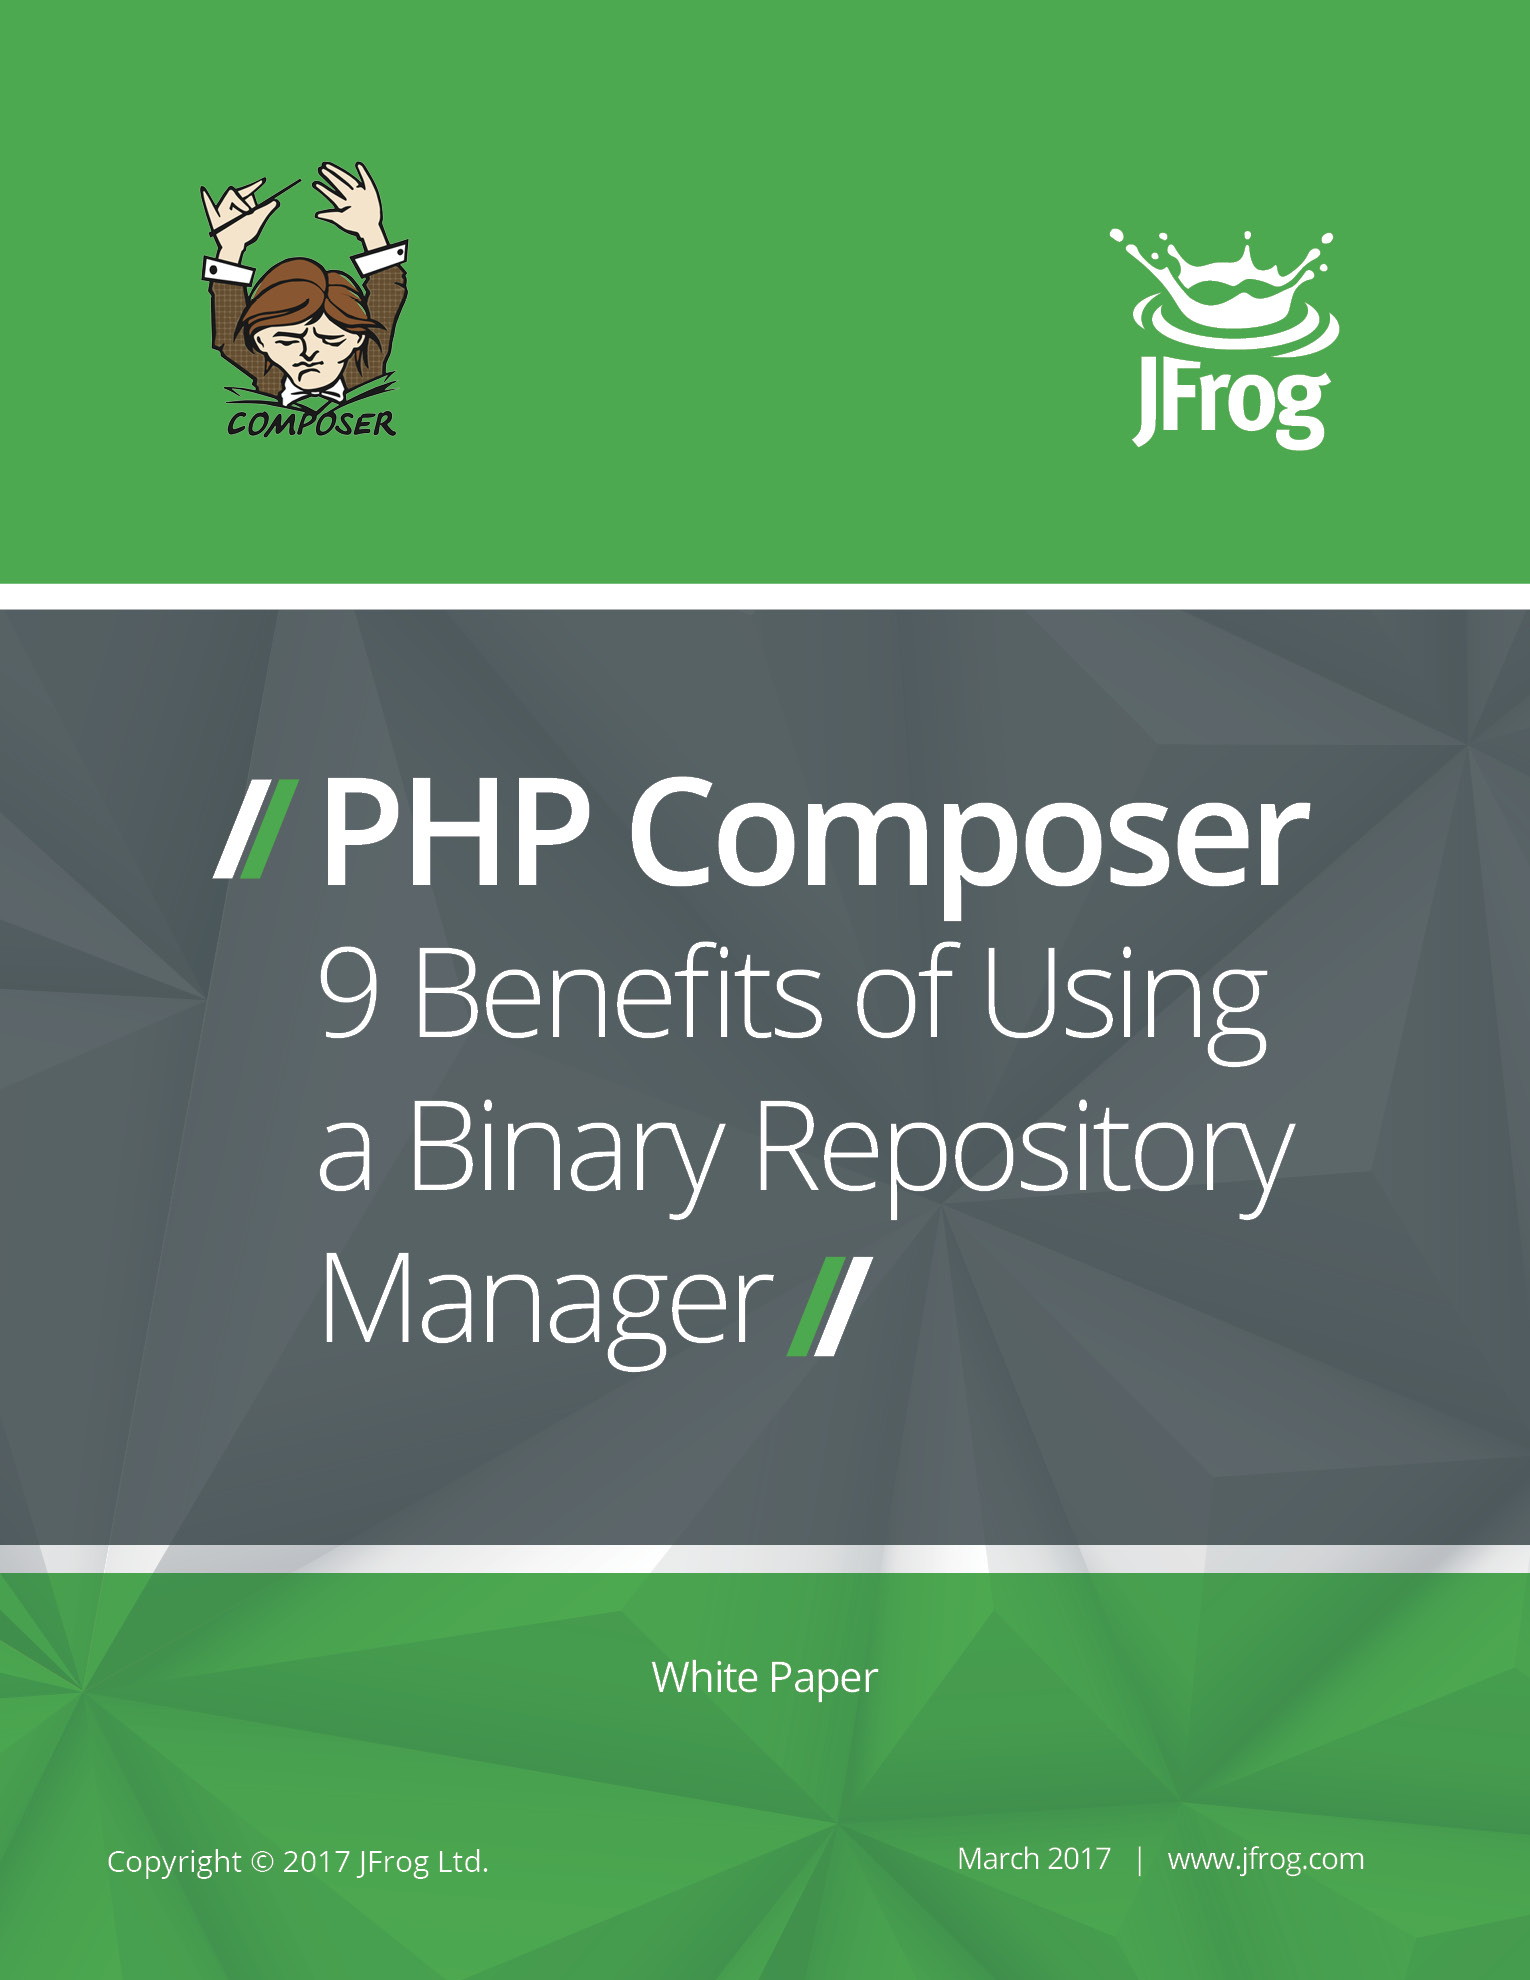 php composer